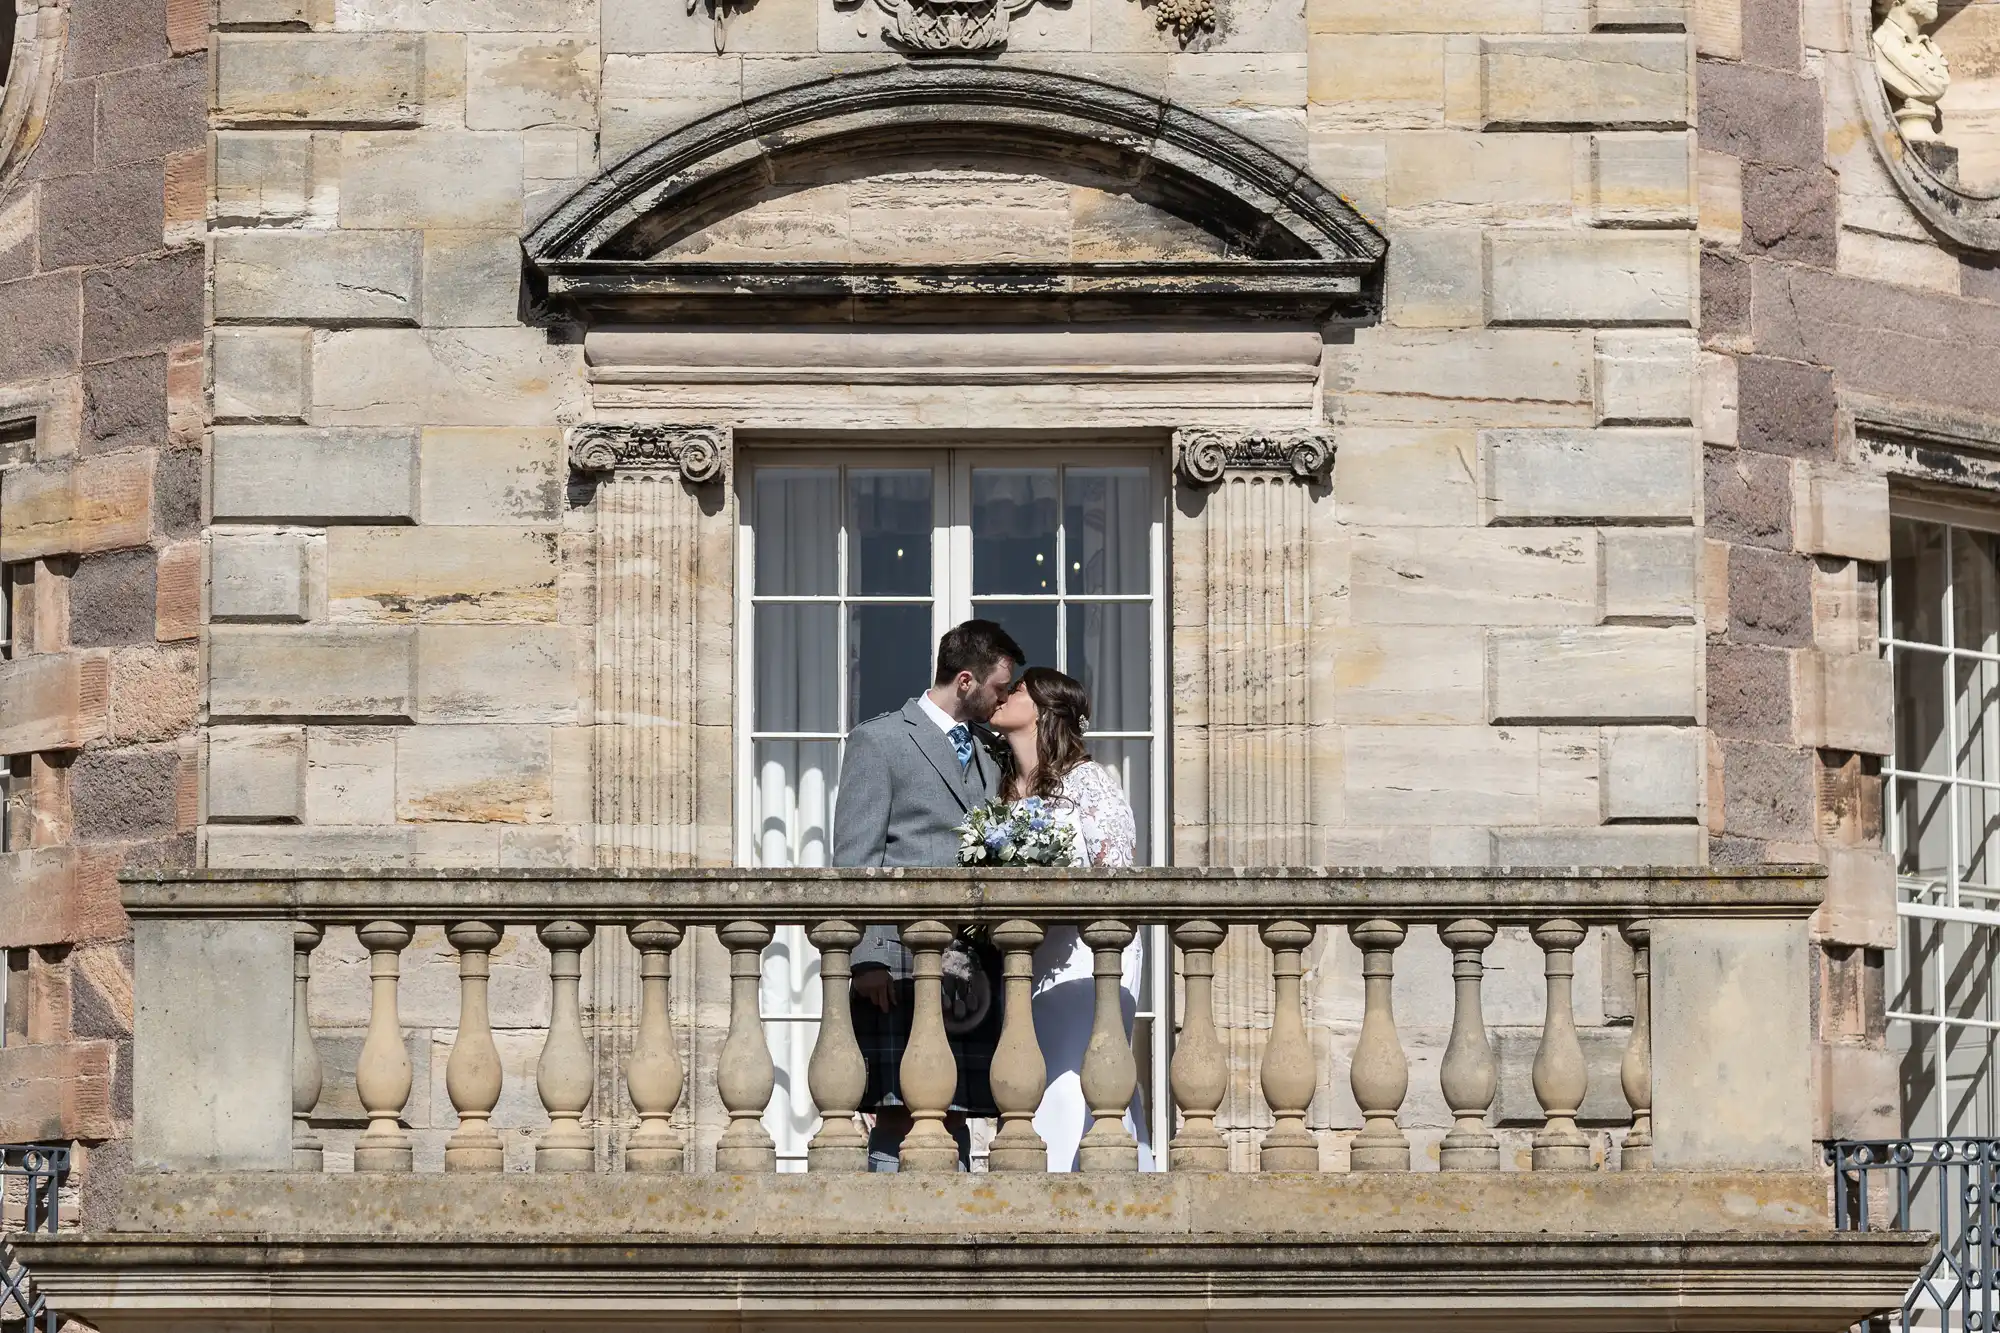 A couple kissing on a balcony of a historic building, surrounded by architectural details and a clear sky.